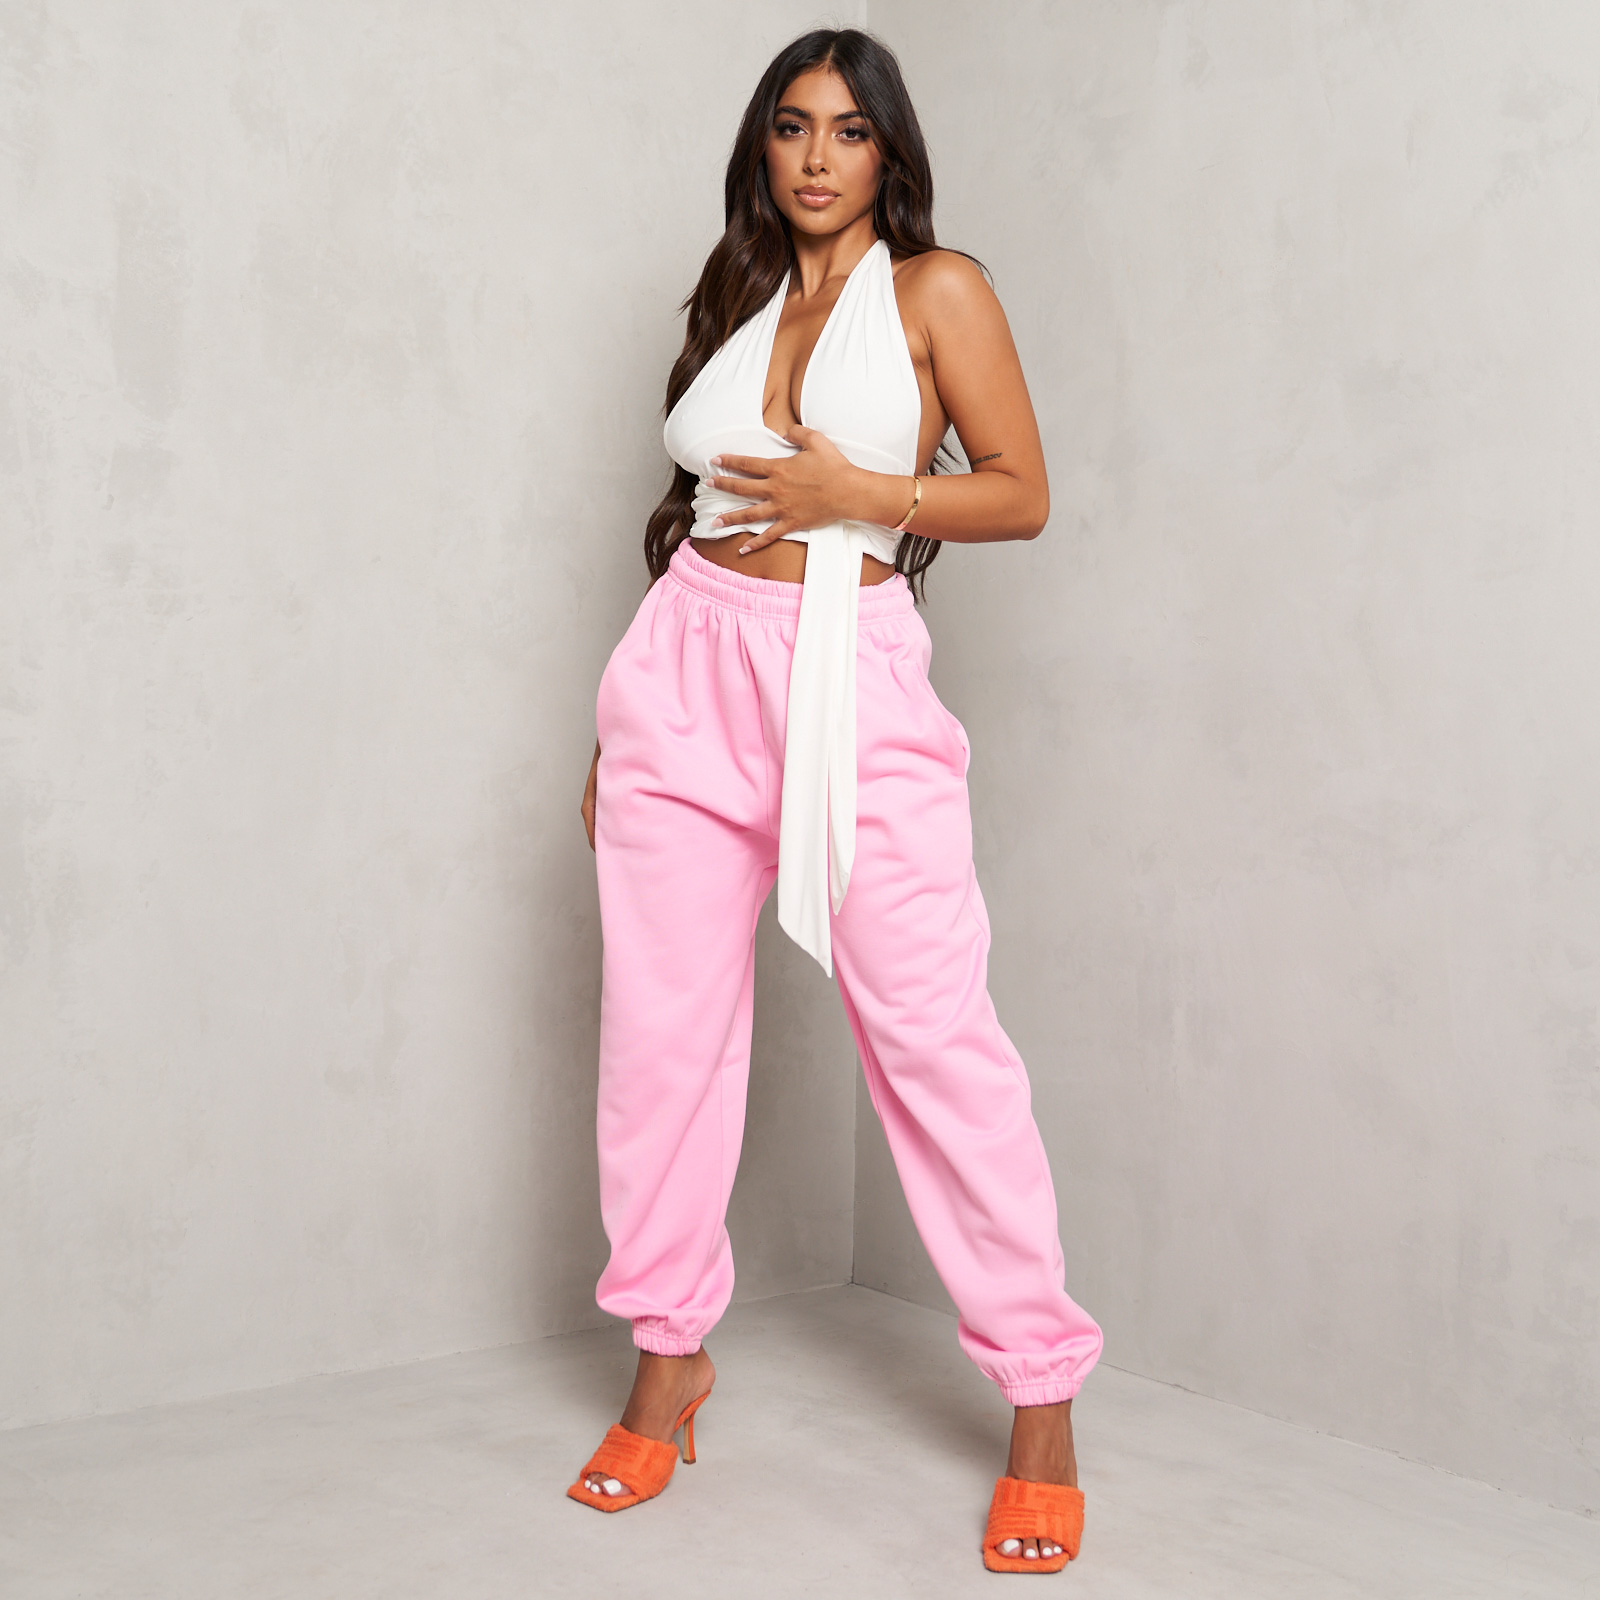 Oversized Joggers In Baby Pink UK 12, Pink